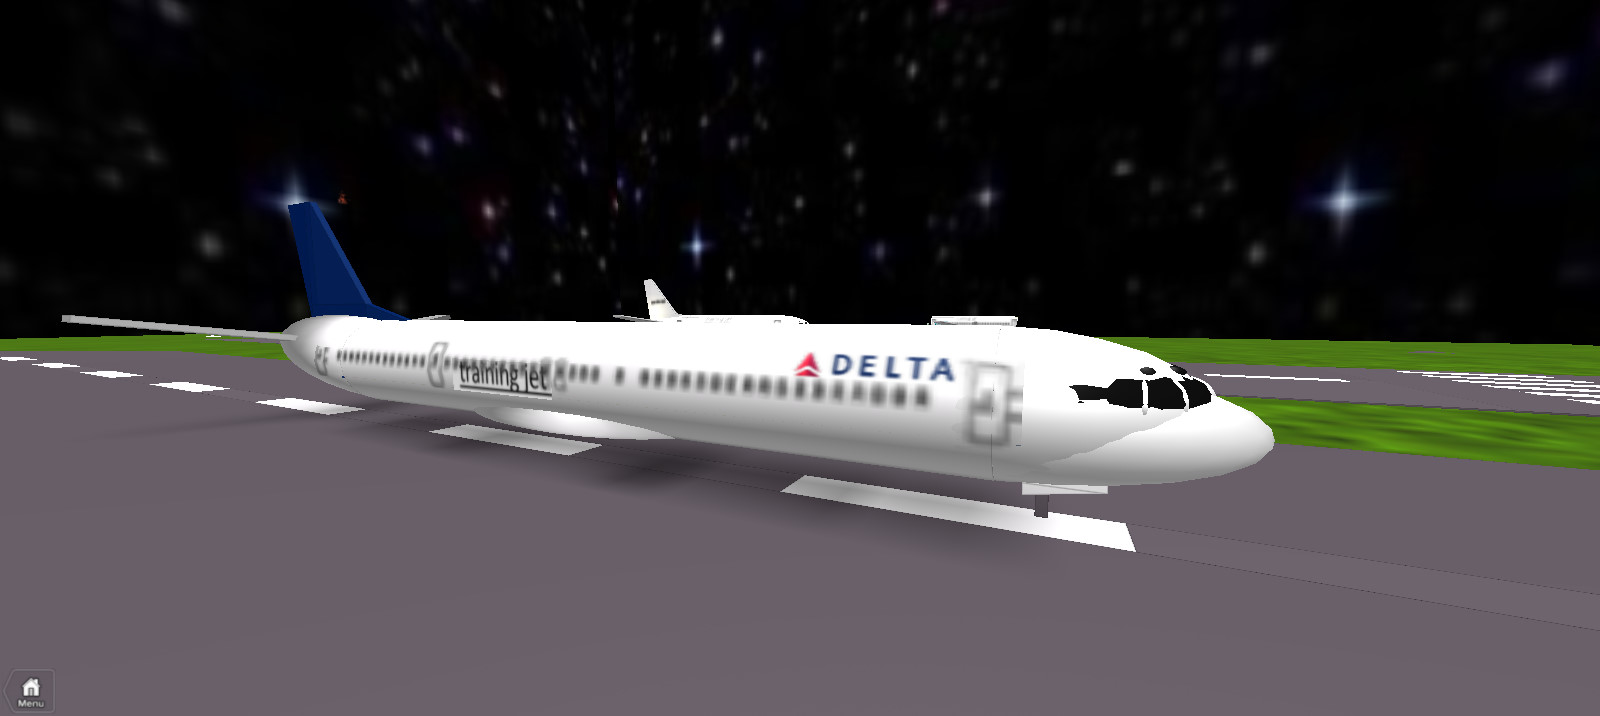 Delta Airlines Wiki United Airlines And Travelling - scandinavian airlines the roblox airline industry wiki